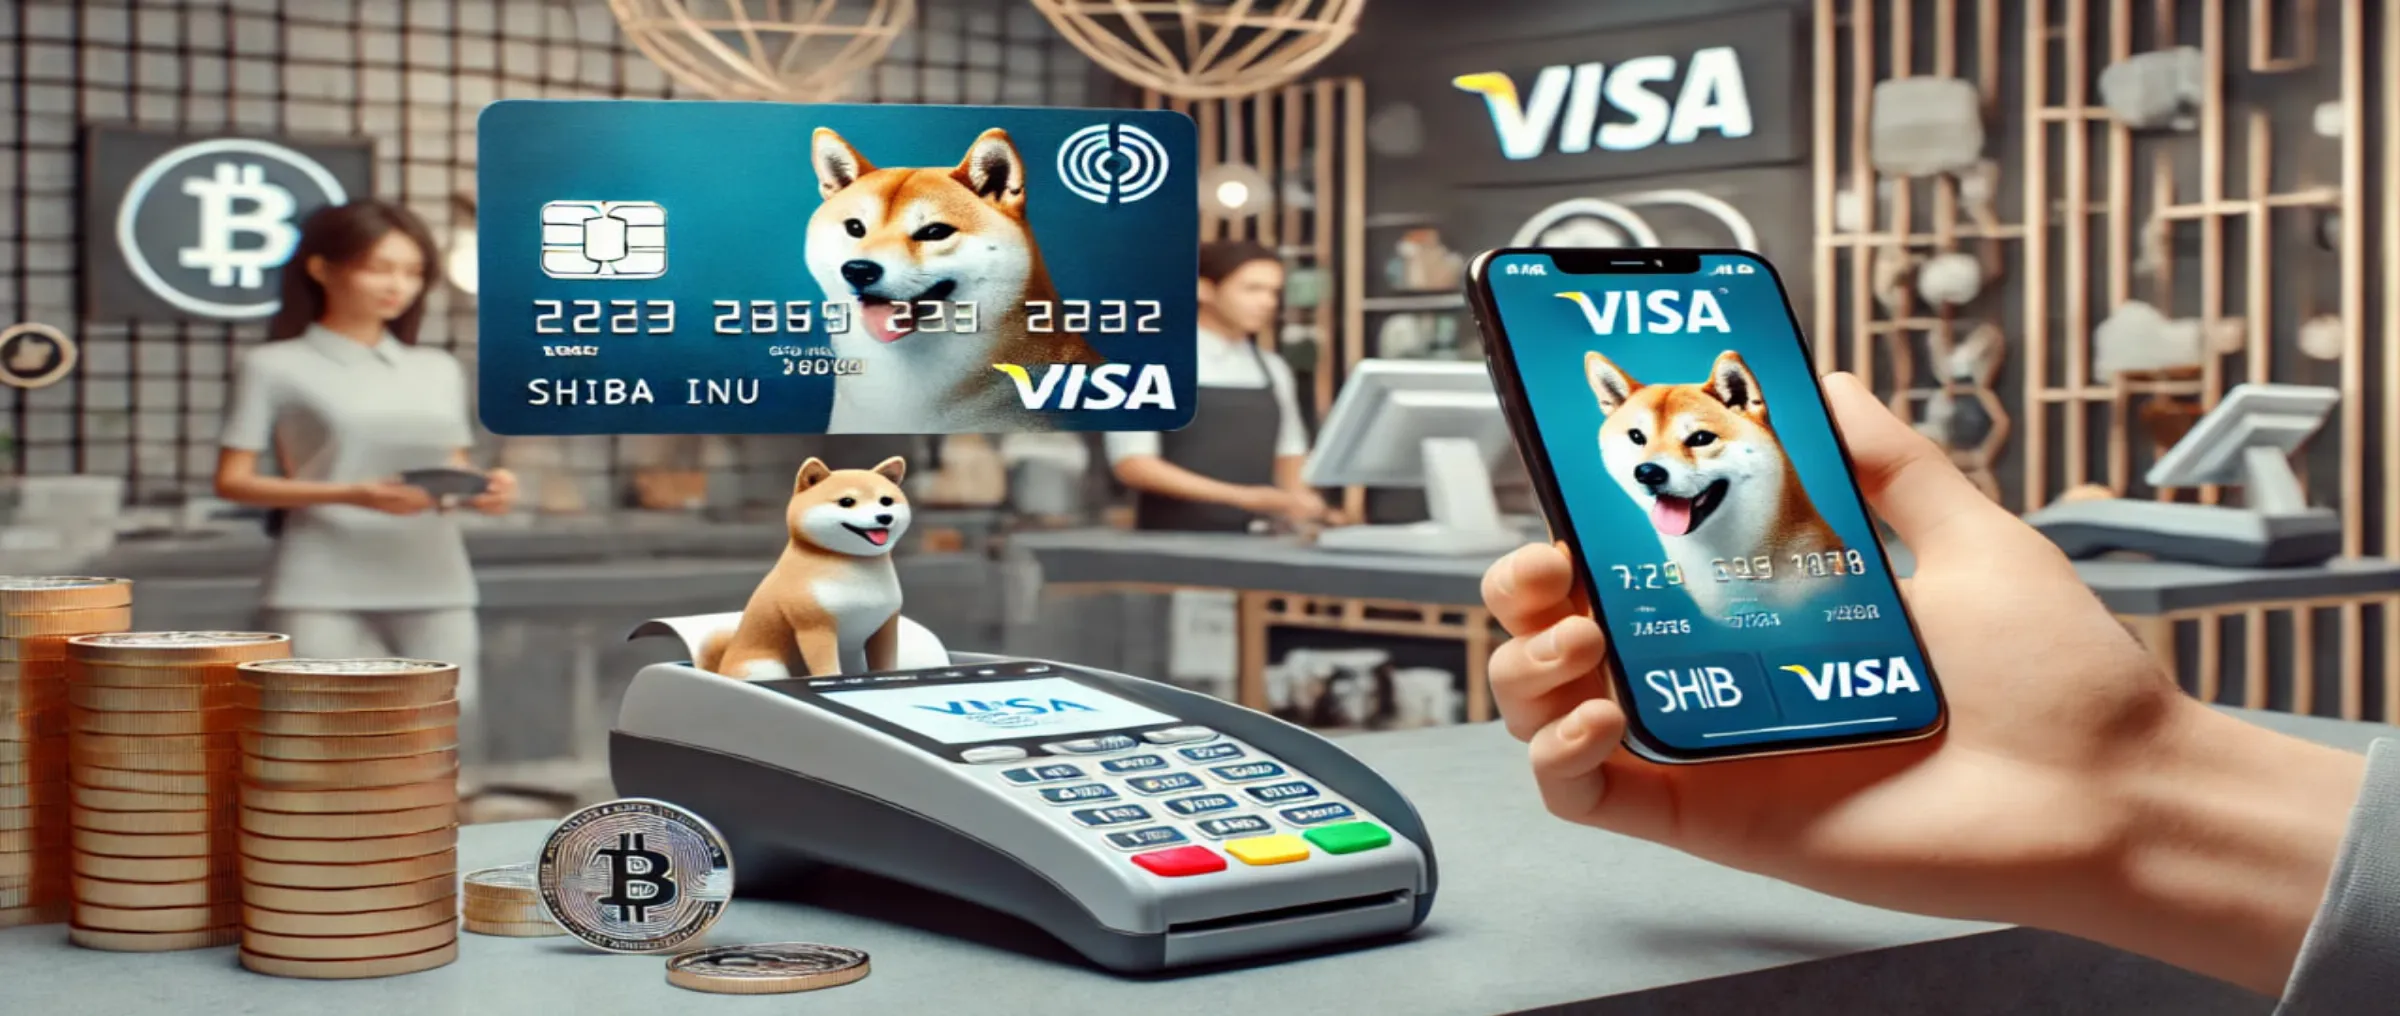 Shiba Inu is now available for payments with the Crypto.com Visa card